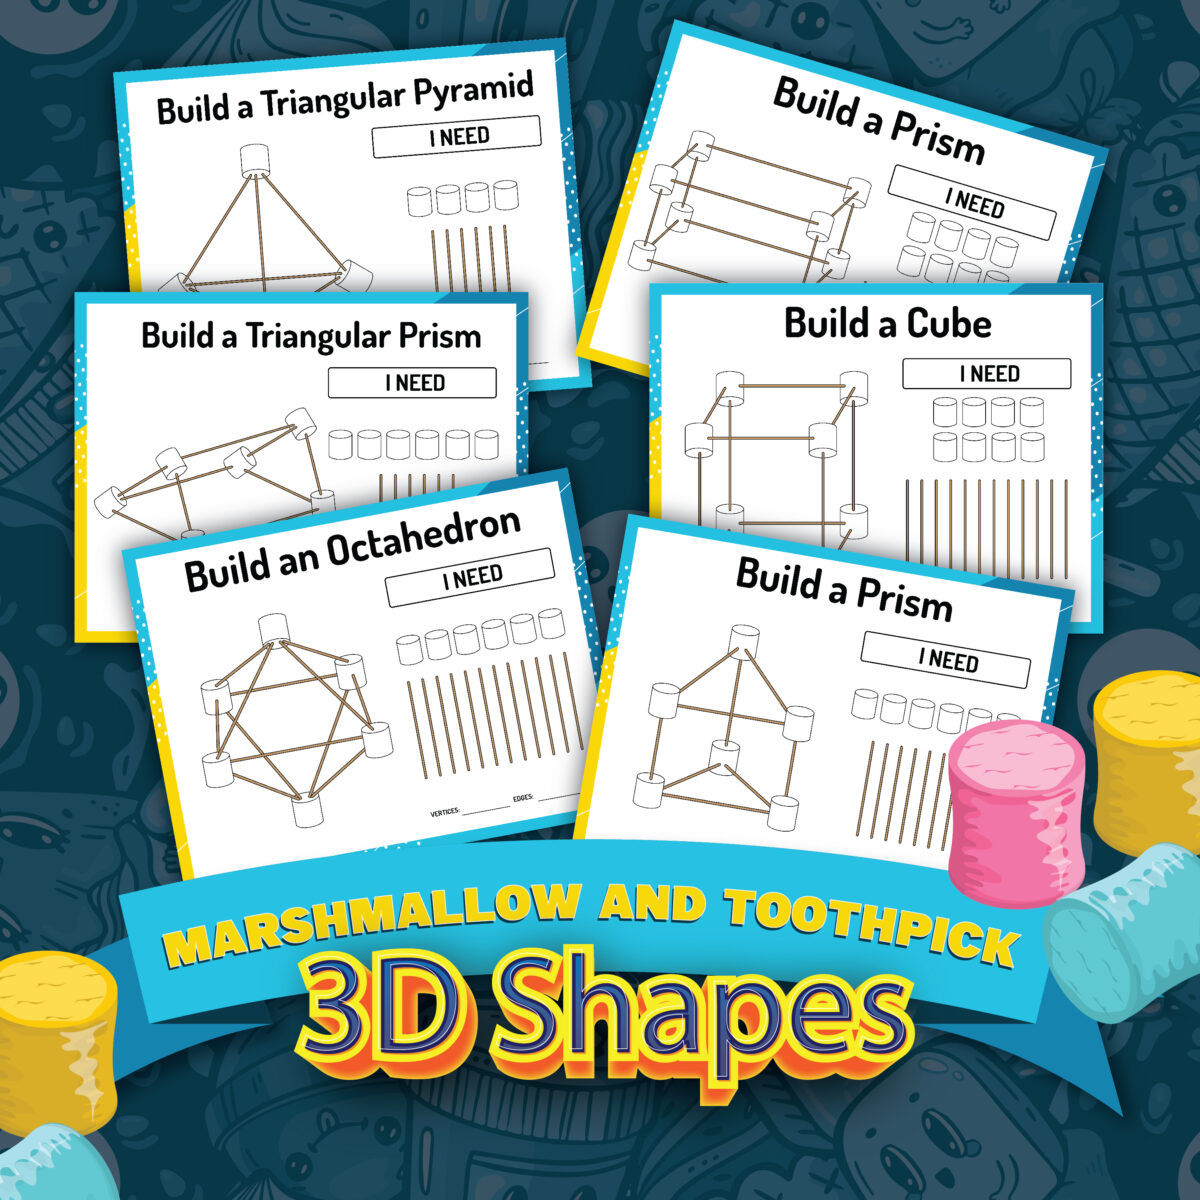 Download these free printable marshmallow and toothpick 3D shape worksheets as a fun educational activity that teaches kids geometry.